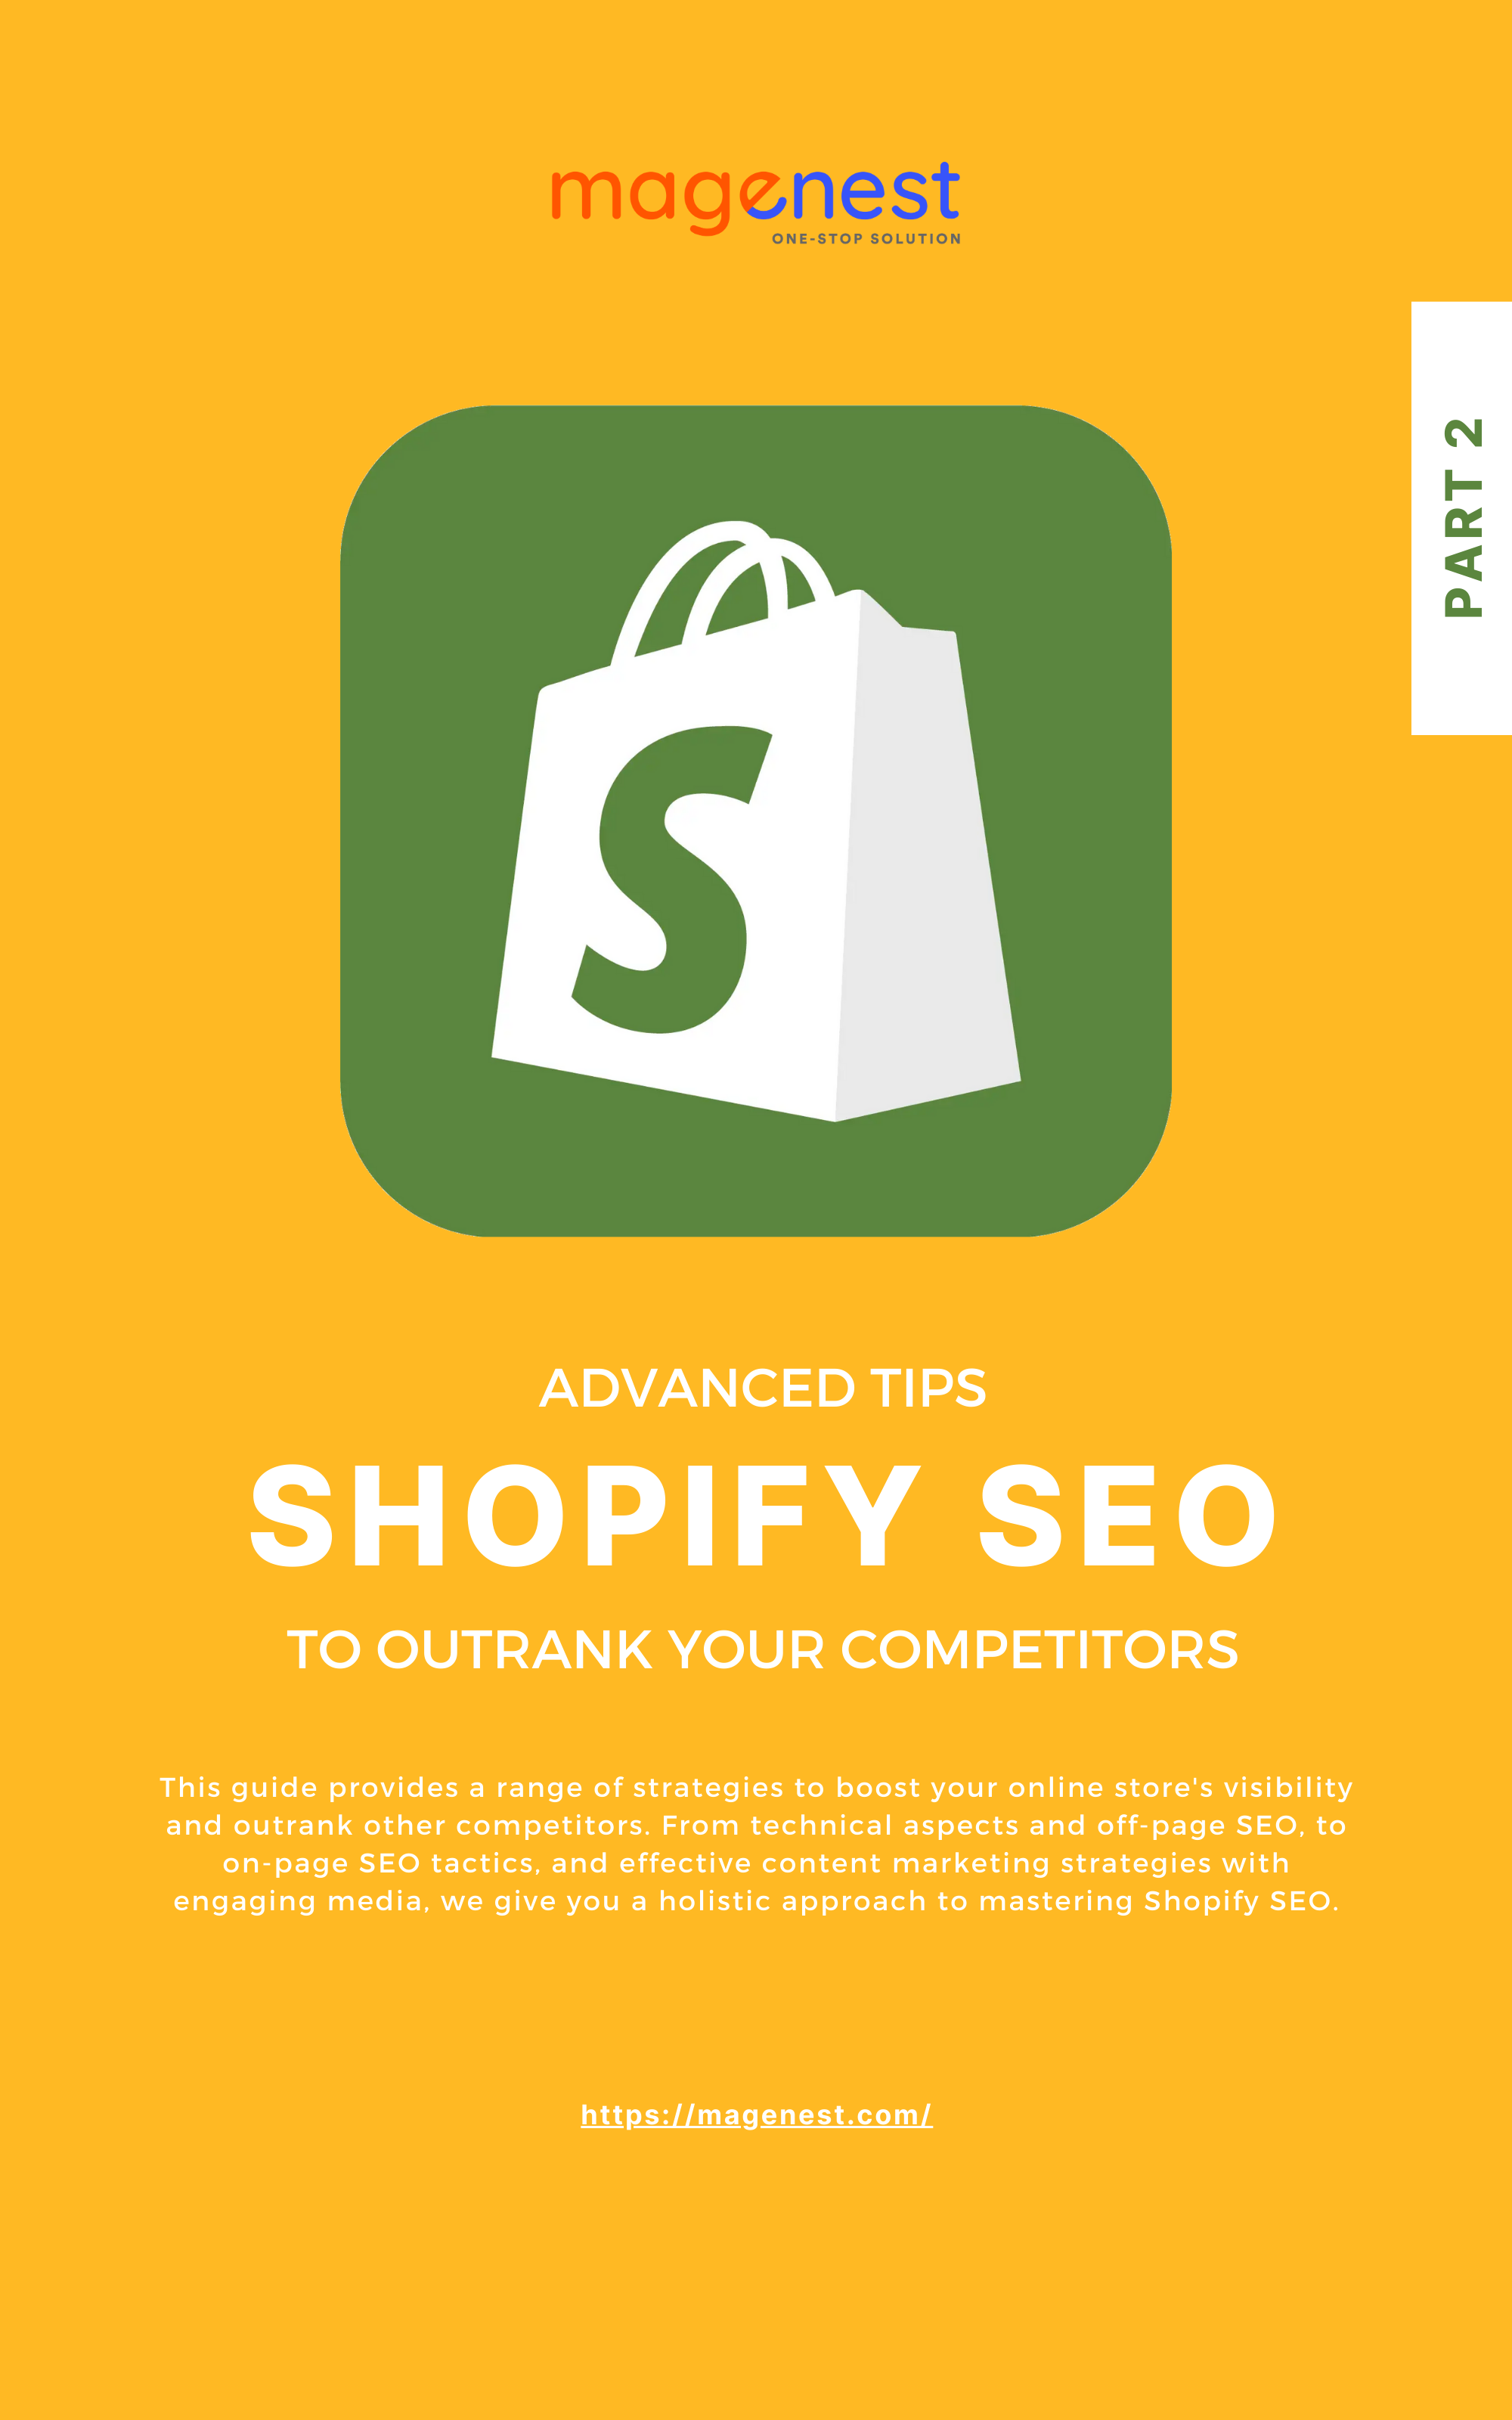 eBook SHOPIFY SEO GUIDE PART 2: Advanced tips to outrank your competitors0